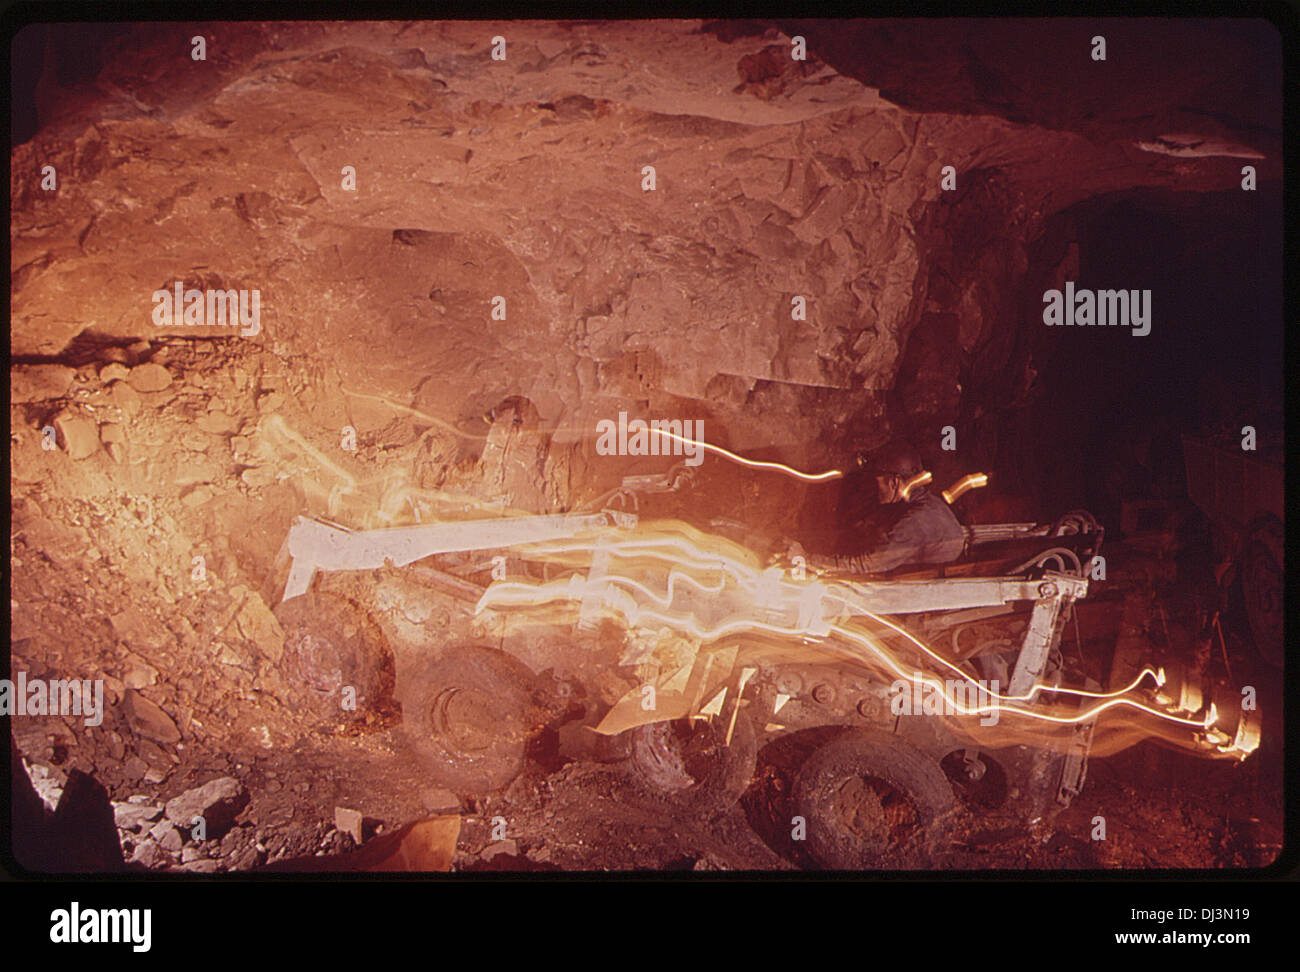 TIME EXPOSURE OF MINING OPERATIONS 743 Stock Photo